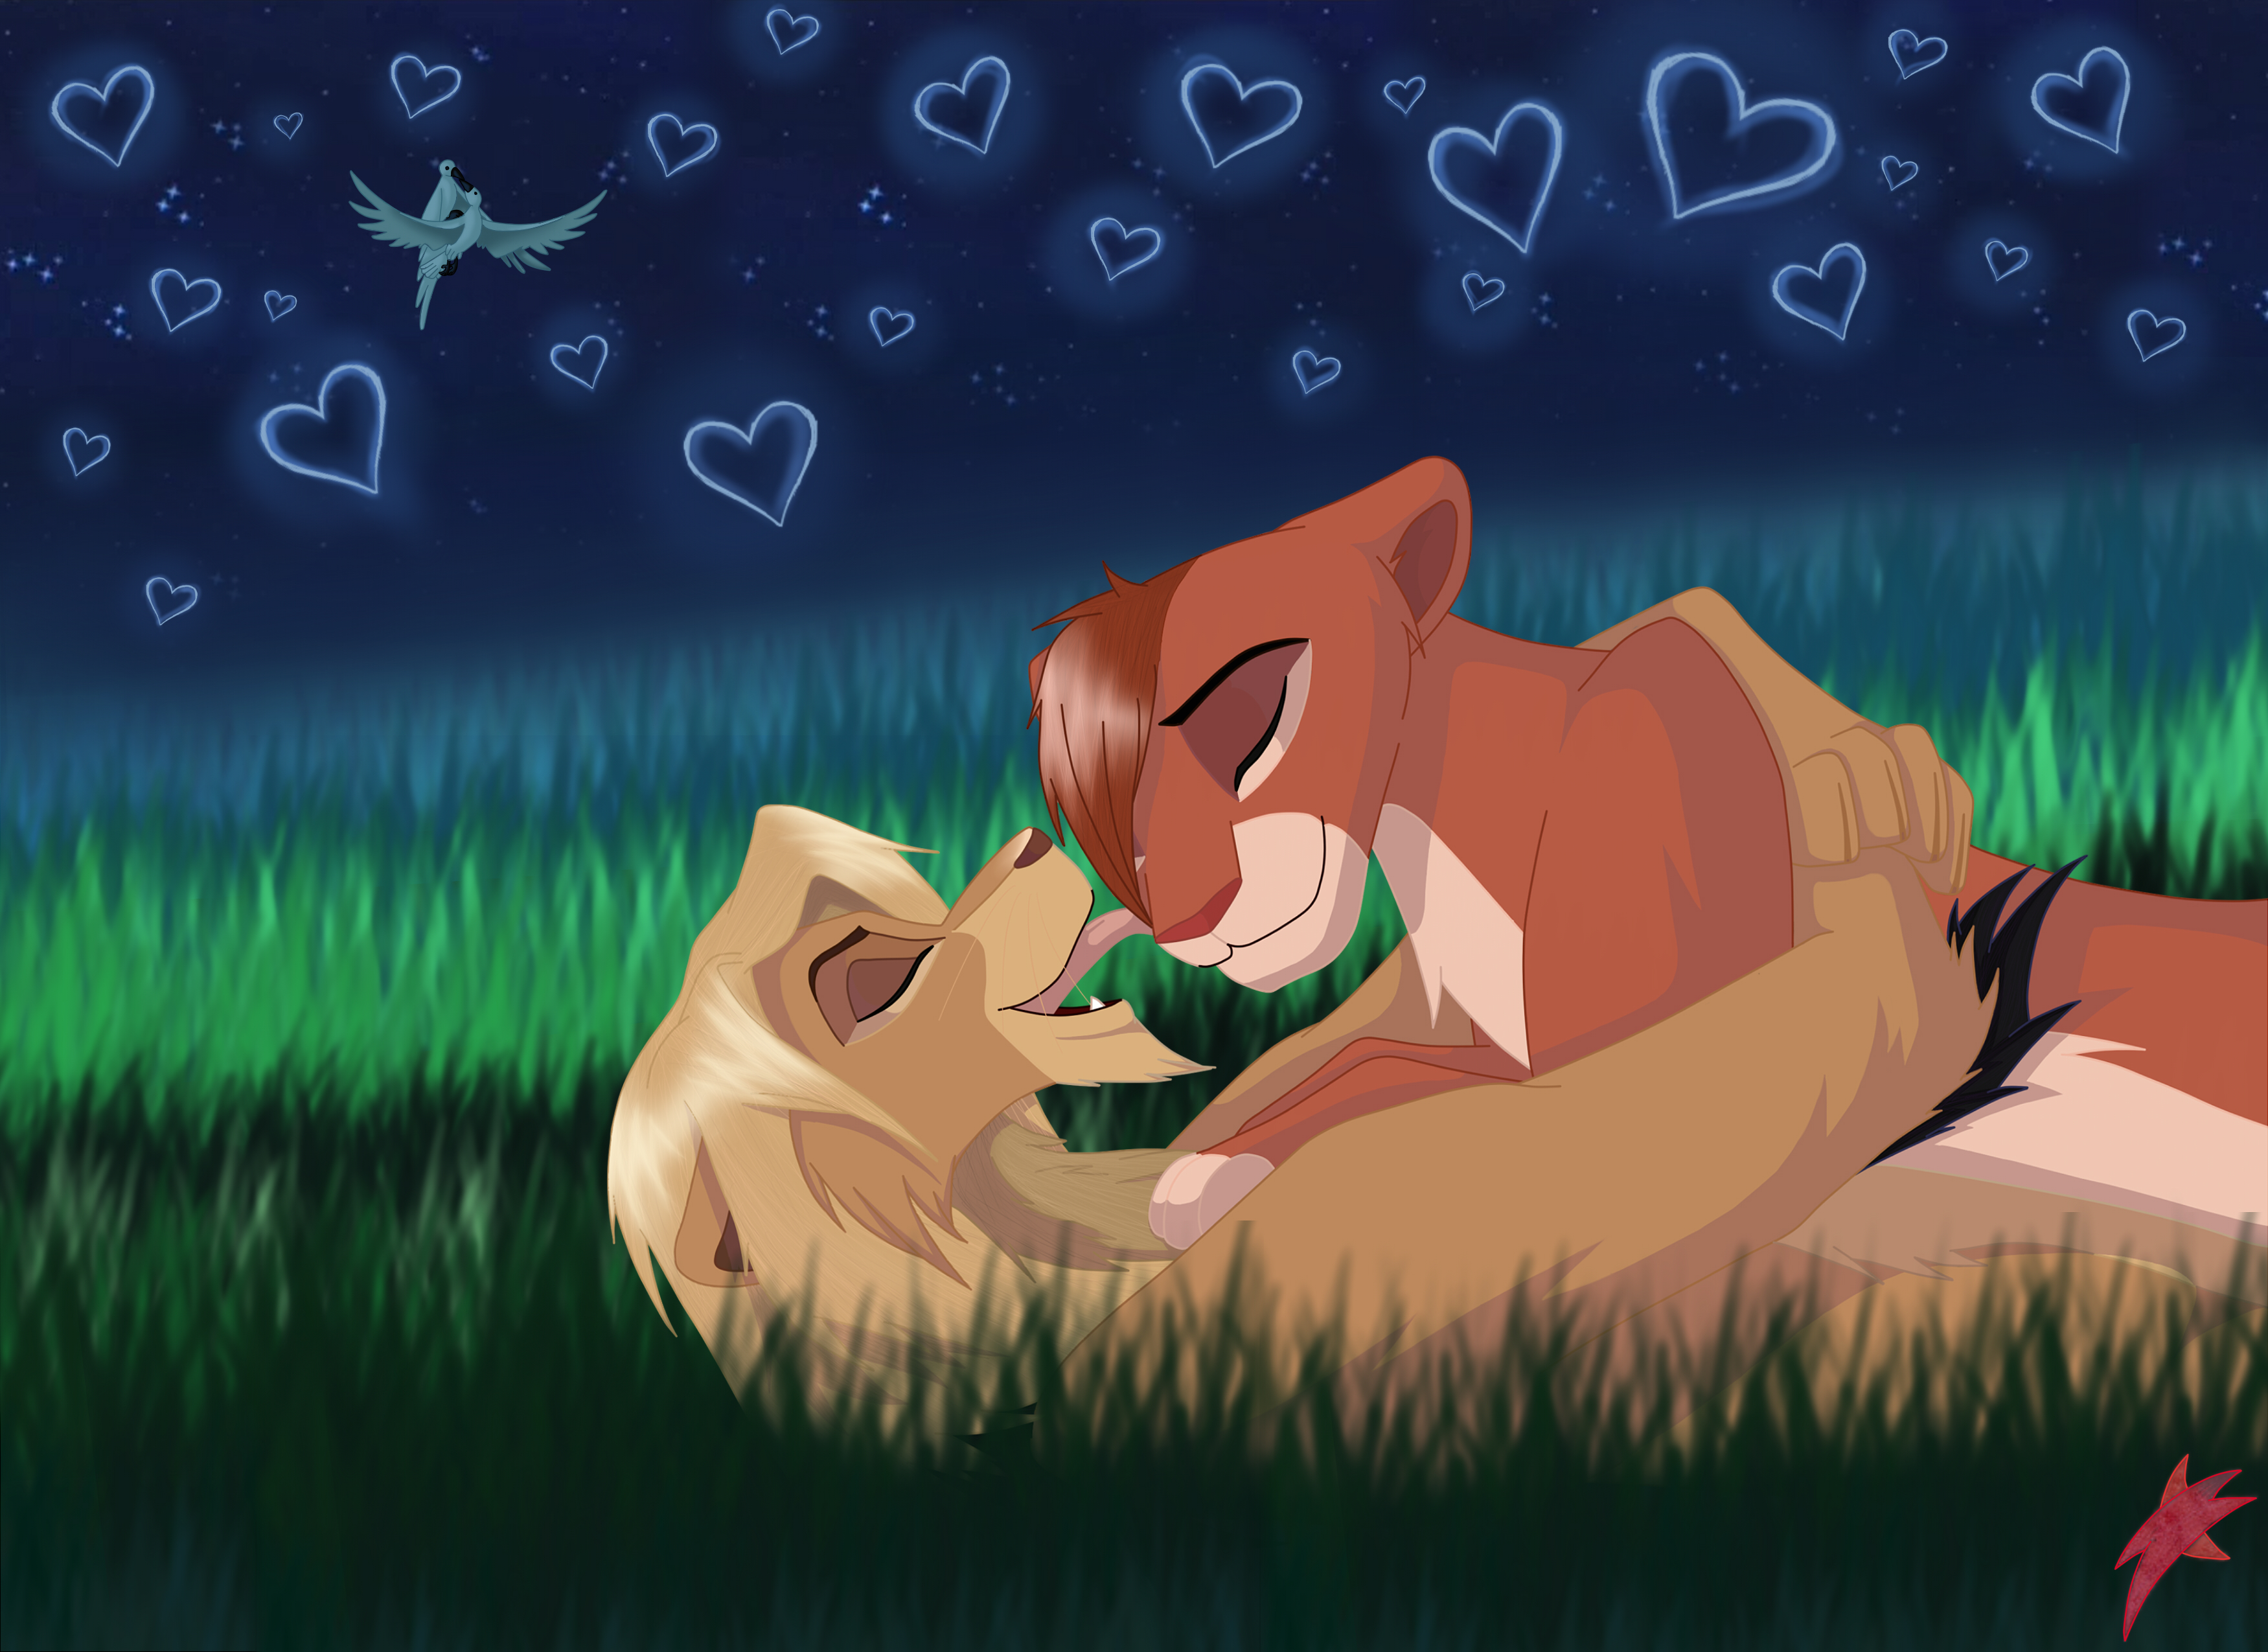 Your Love Is King by shyne88 on DeviantArt